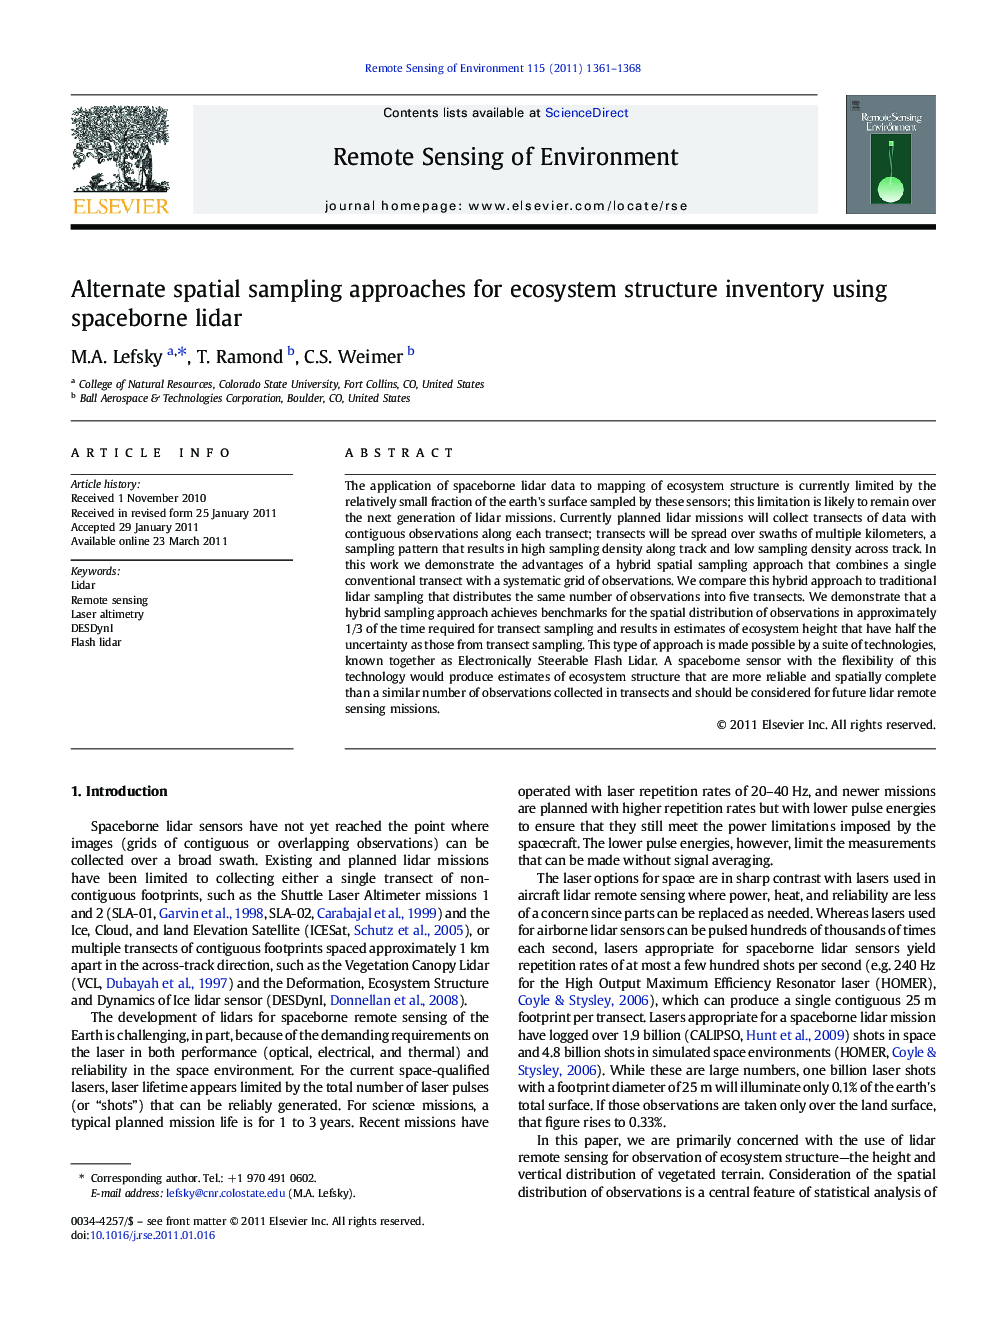 Alternate spatial sampling approaches for ecosystem structure inventory using spaceborne lidar